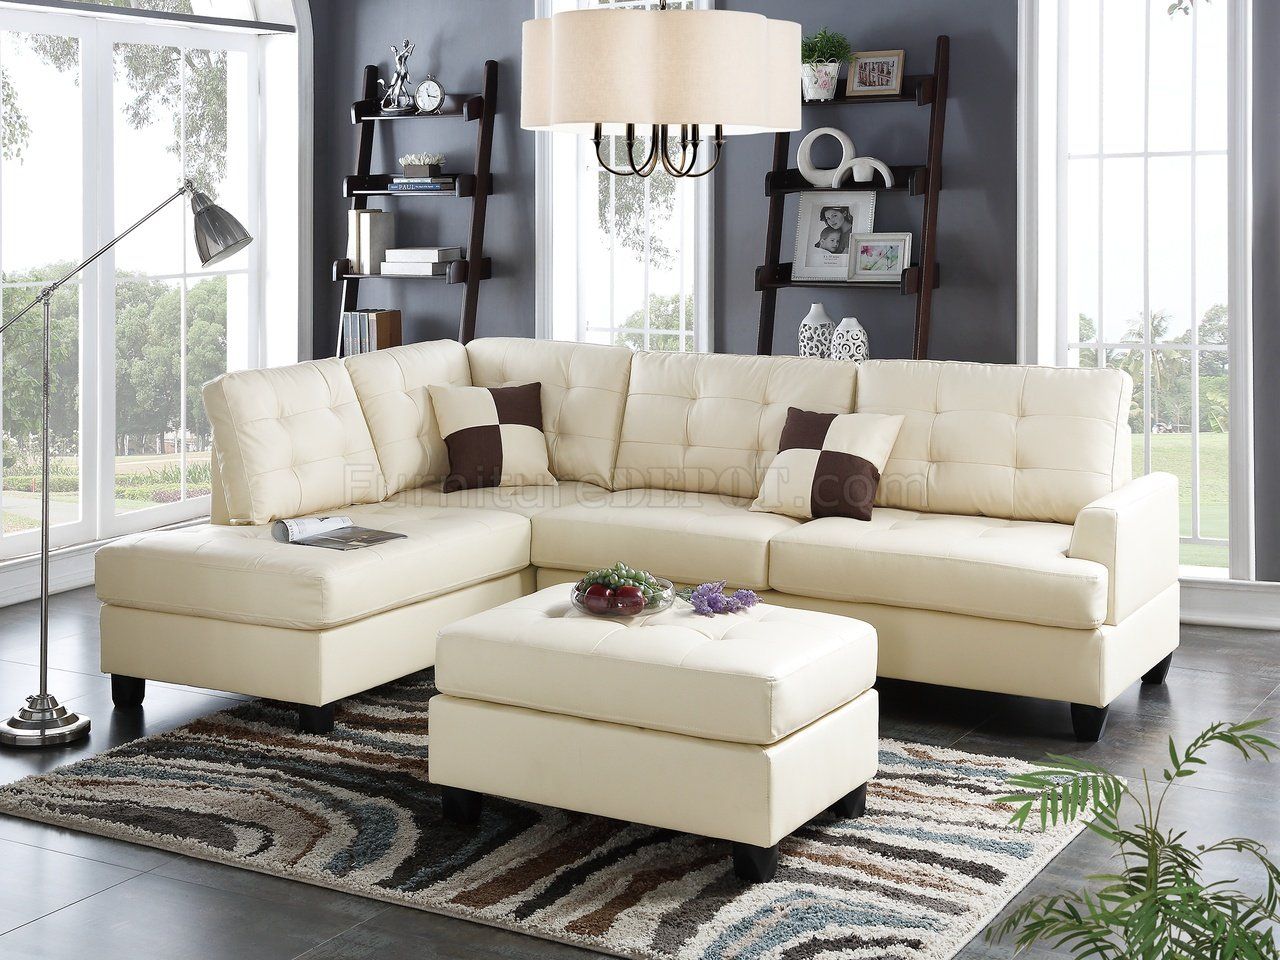 F6856 Sectional Sofa 3pc In Beige Faux Leatherboss Within Small L Shaped Sectional Sofas In Beige (Gallery 13 of 21)